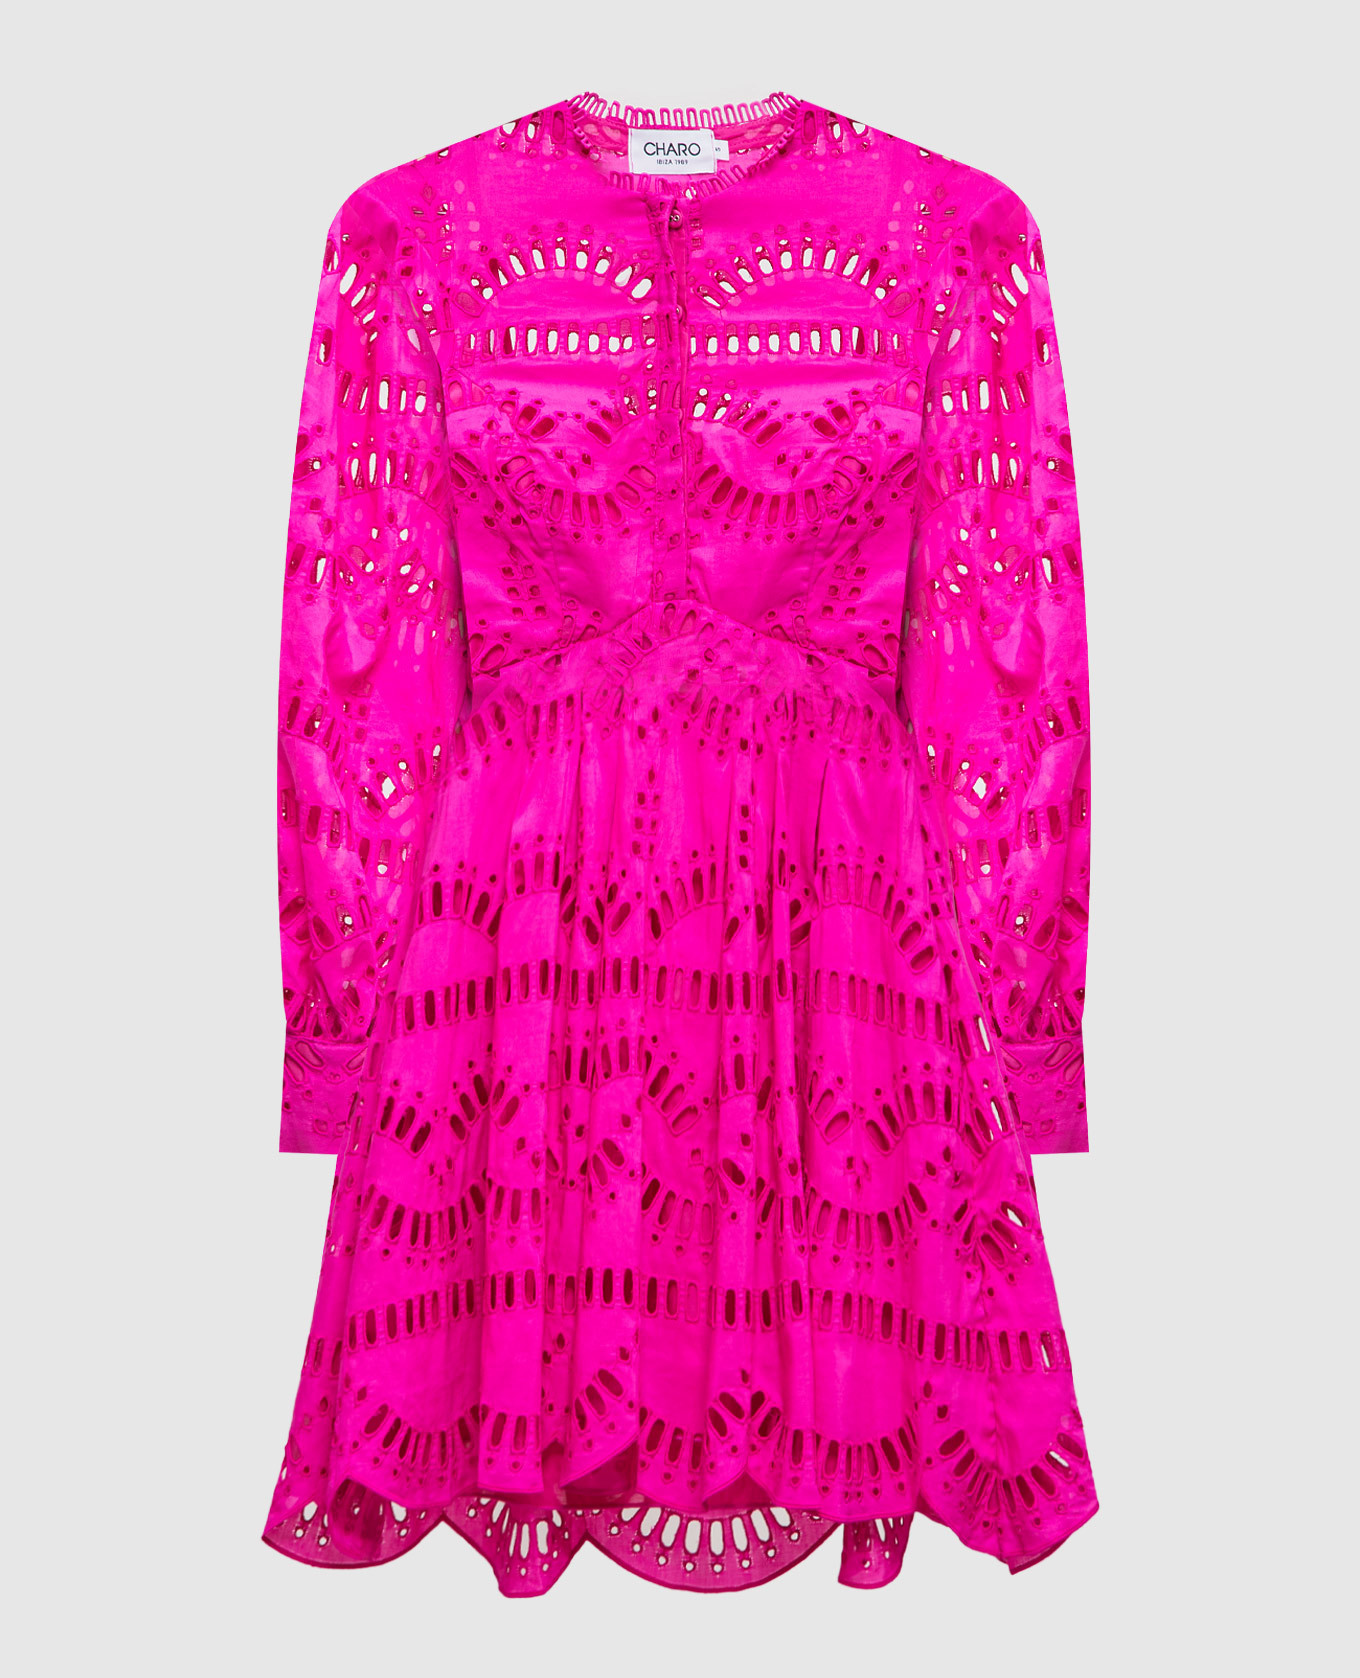 Franca pink shirt dress with broderie embroidery